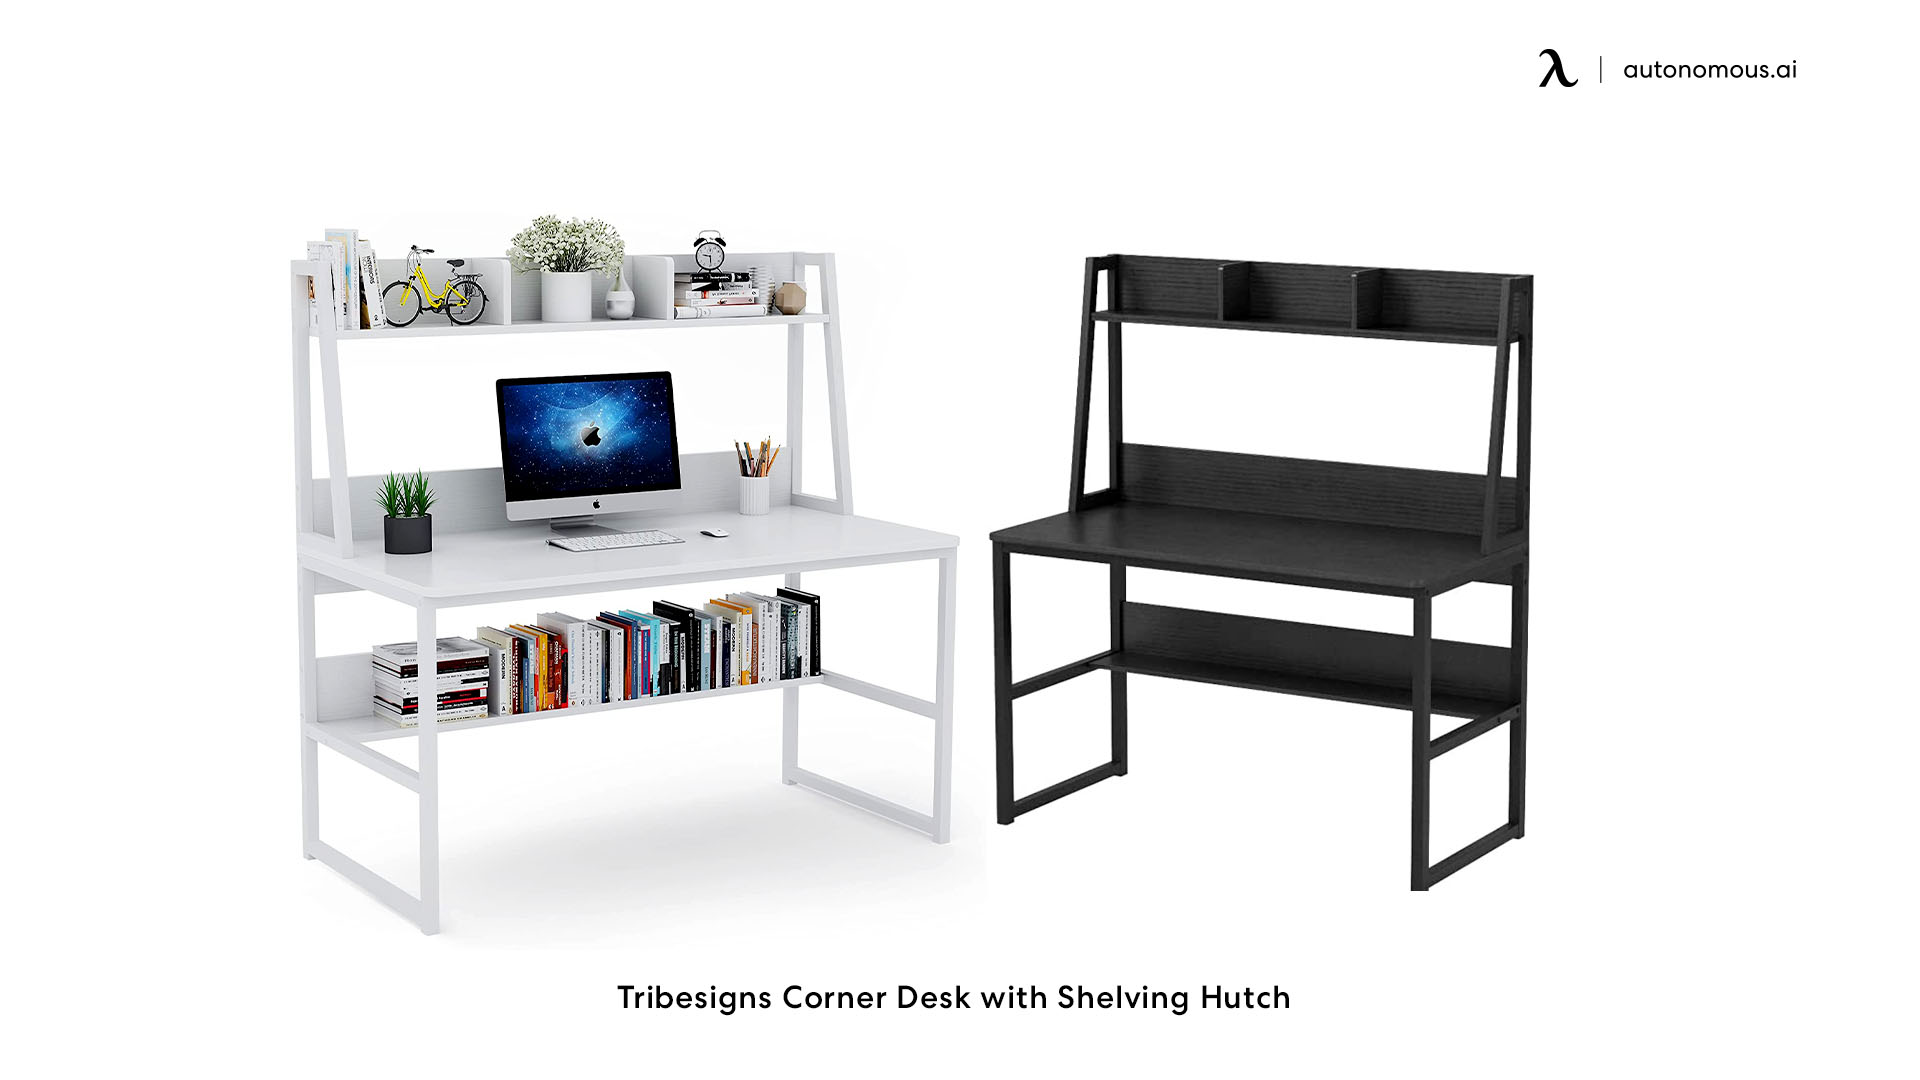 The Tribesigns Desk with Hutch and Bookshelf